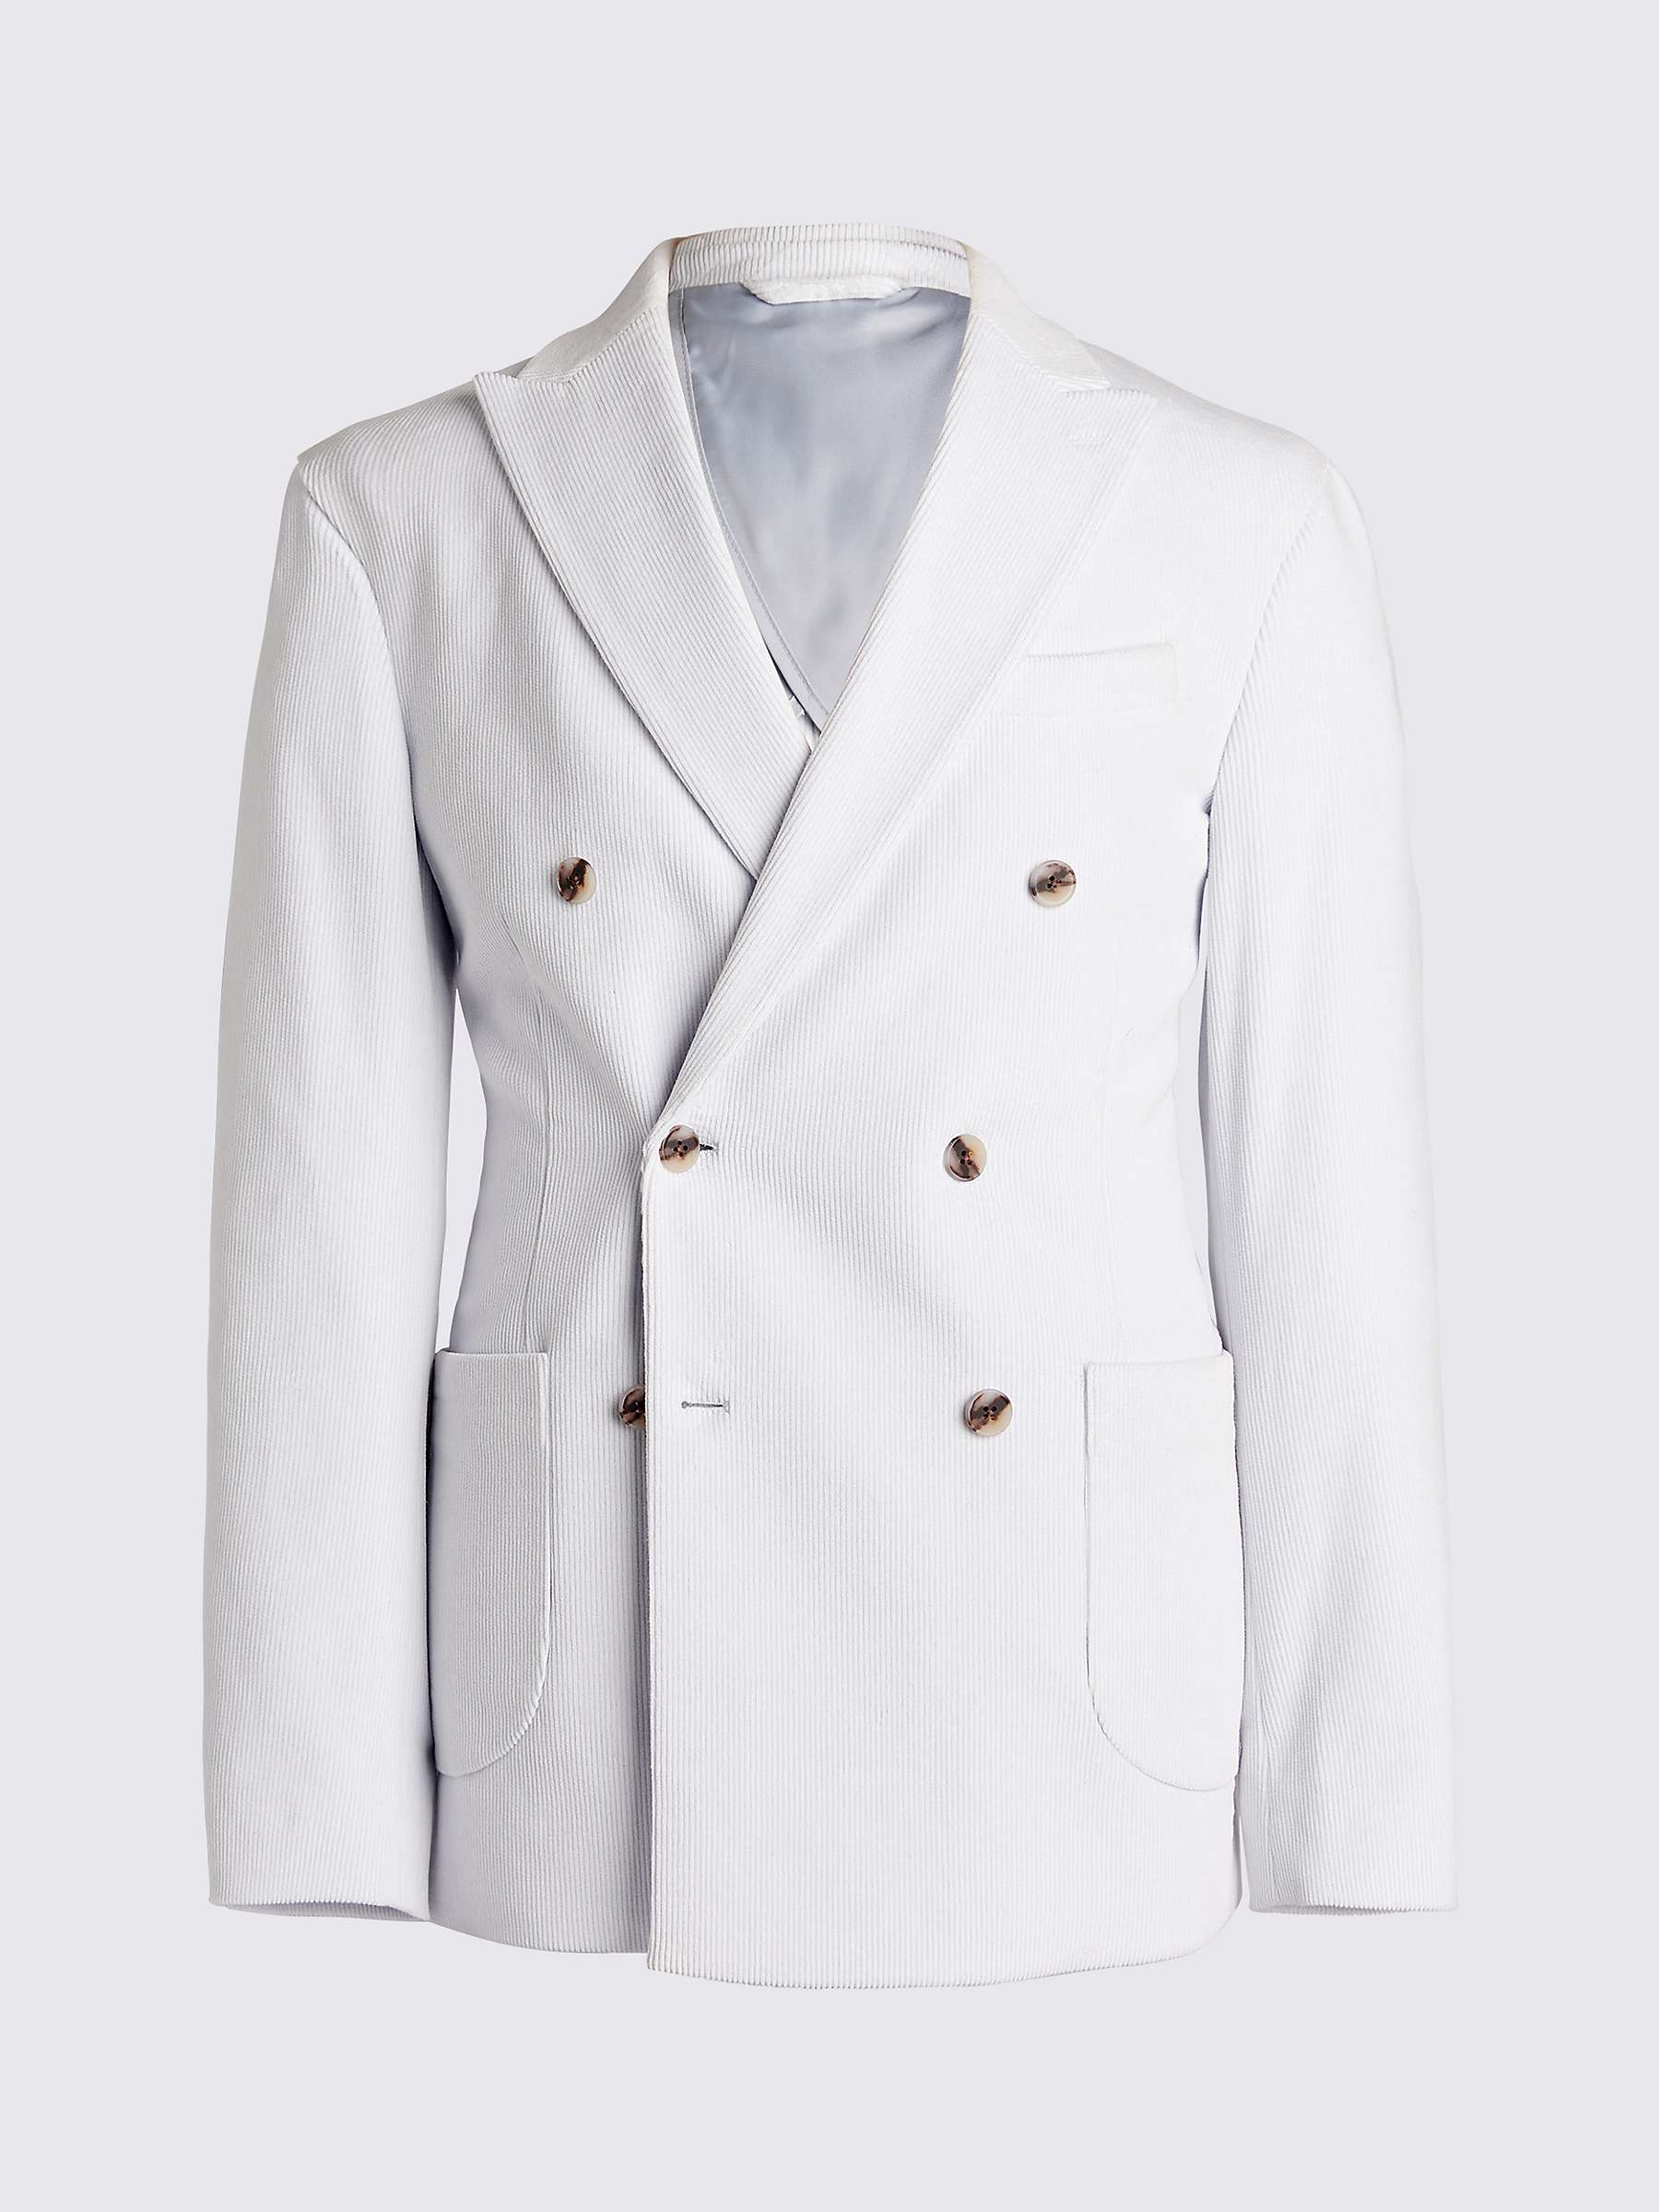 Buy Moss Tailored Fit Double Breasted Corduroy Suit Jacket, Light Blue Online at johnlewis.com